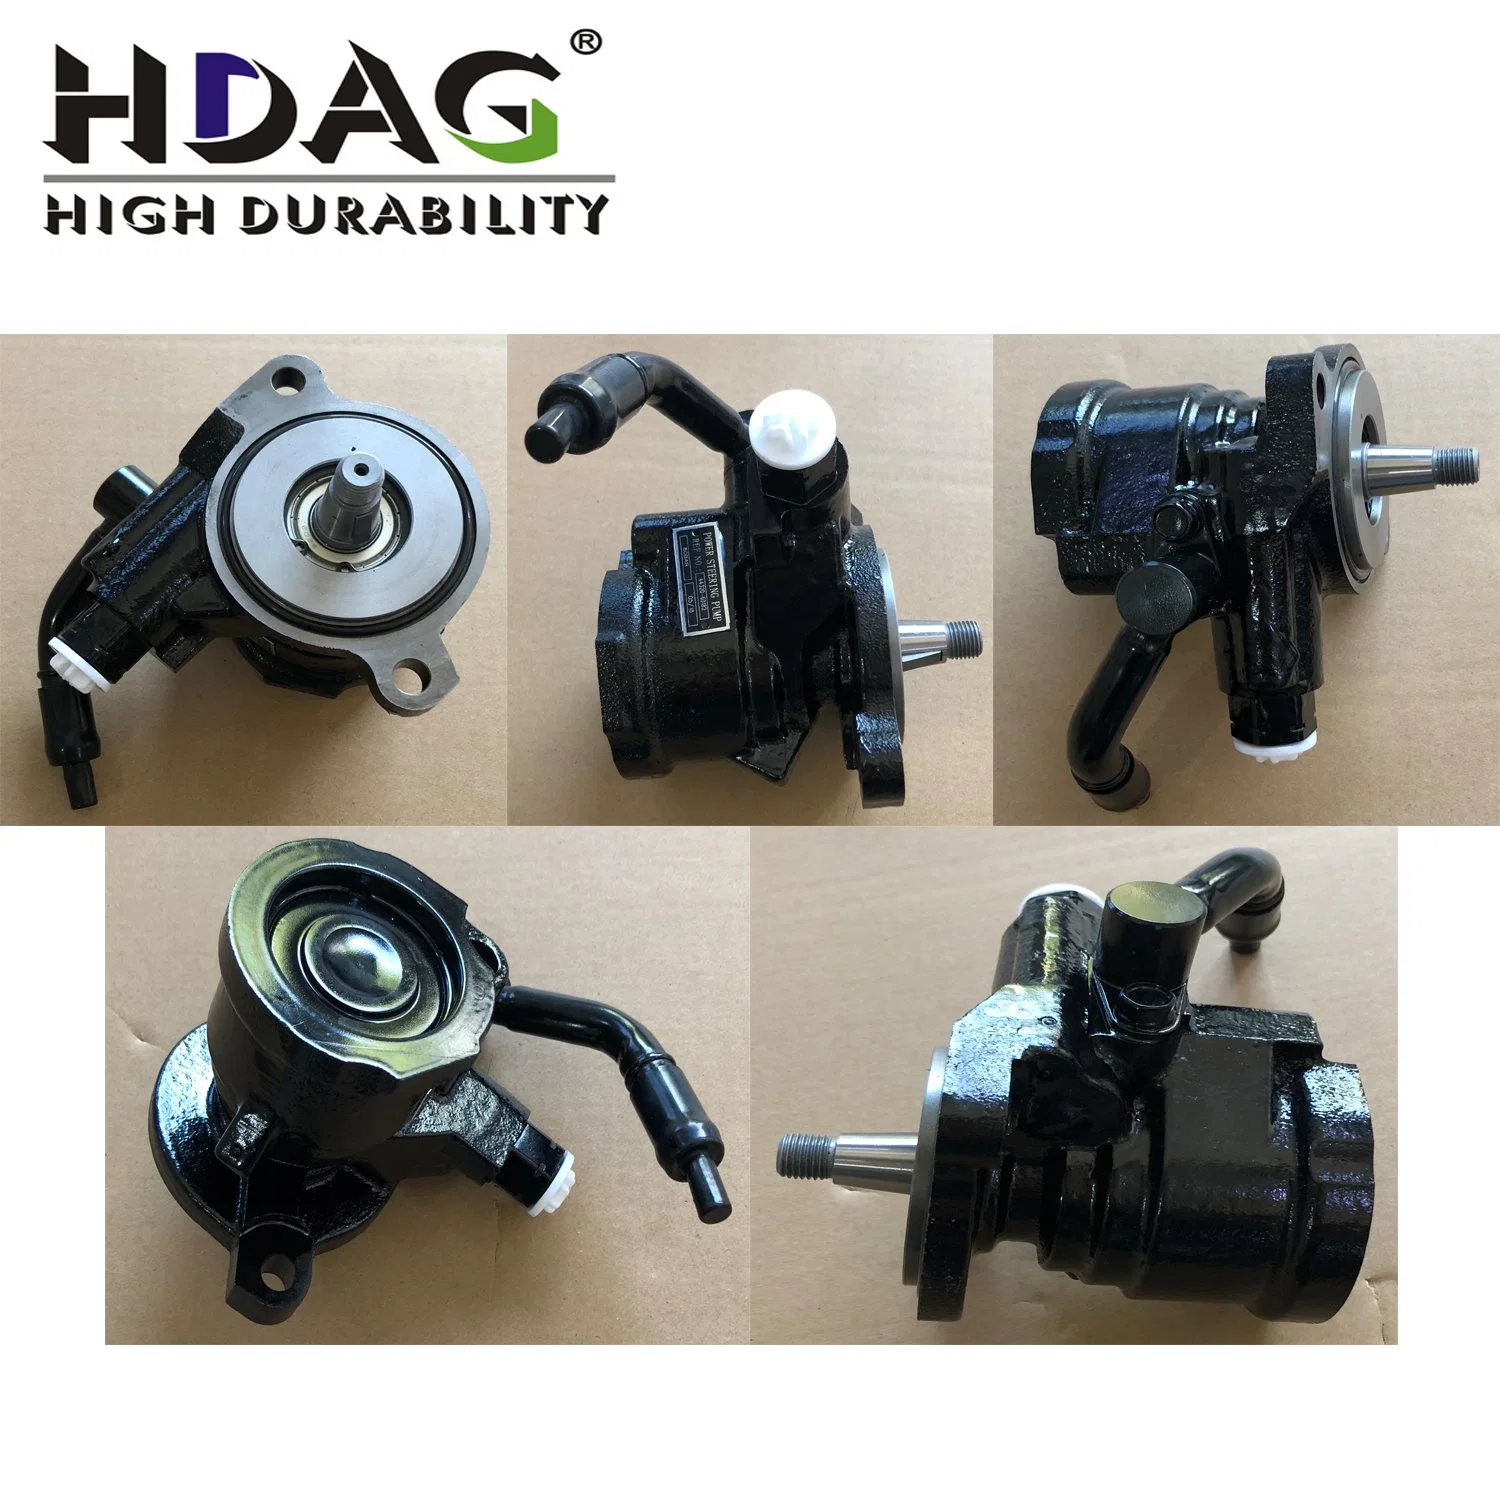 Hdag OEM4432060182 Auto Spare Parts Hydraulic Power Steering Pump Factory for Toyota Nissan Honda Mitsubishi Ford Mazda Citroen Peugeot Renault FIAT Opel